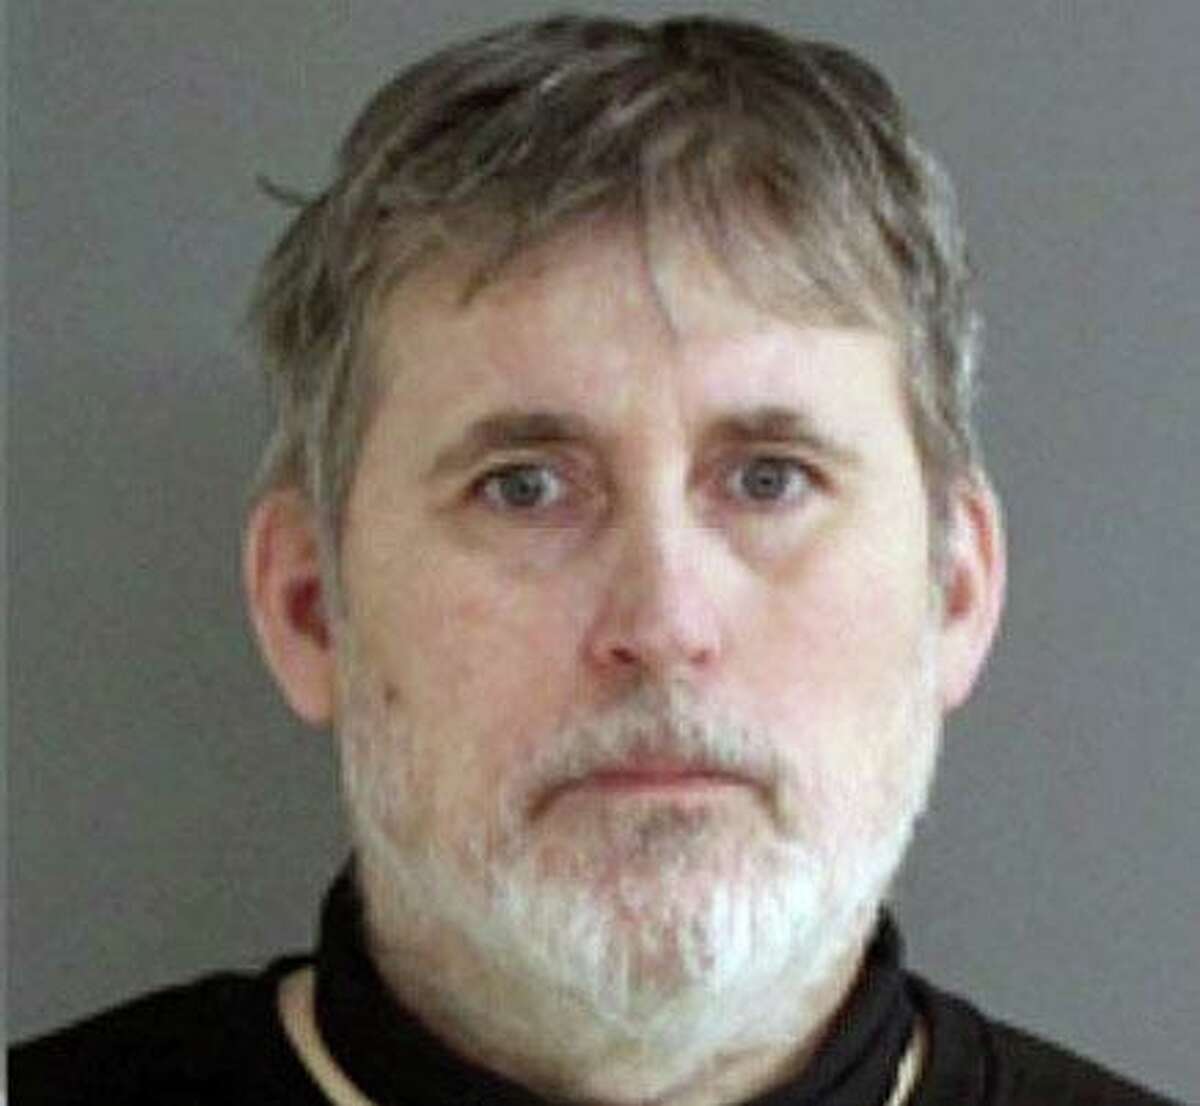 Gregory Garbinski, 54, was charged with third-degree assault of a disabled person, first-degree unlawful restraint, second-degree strangulation, cruelty to persons and second-degree breach of peace.